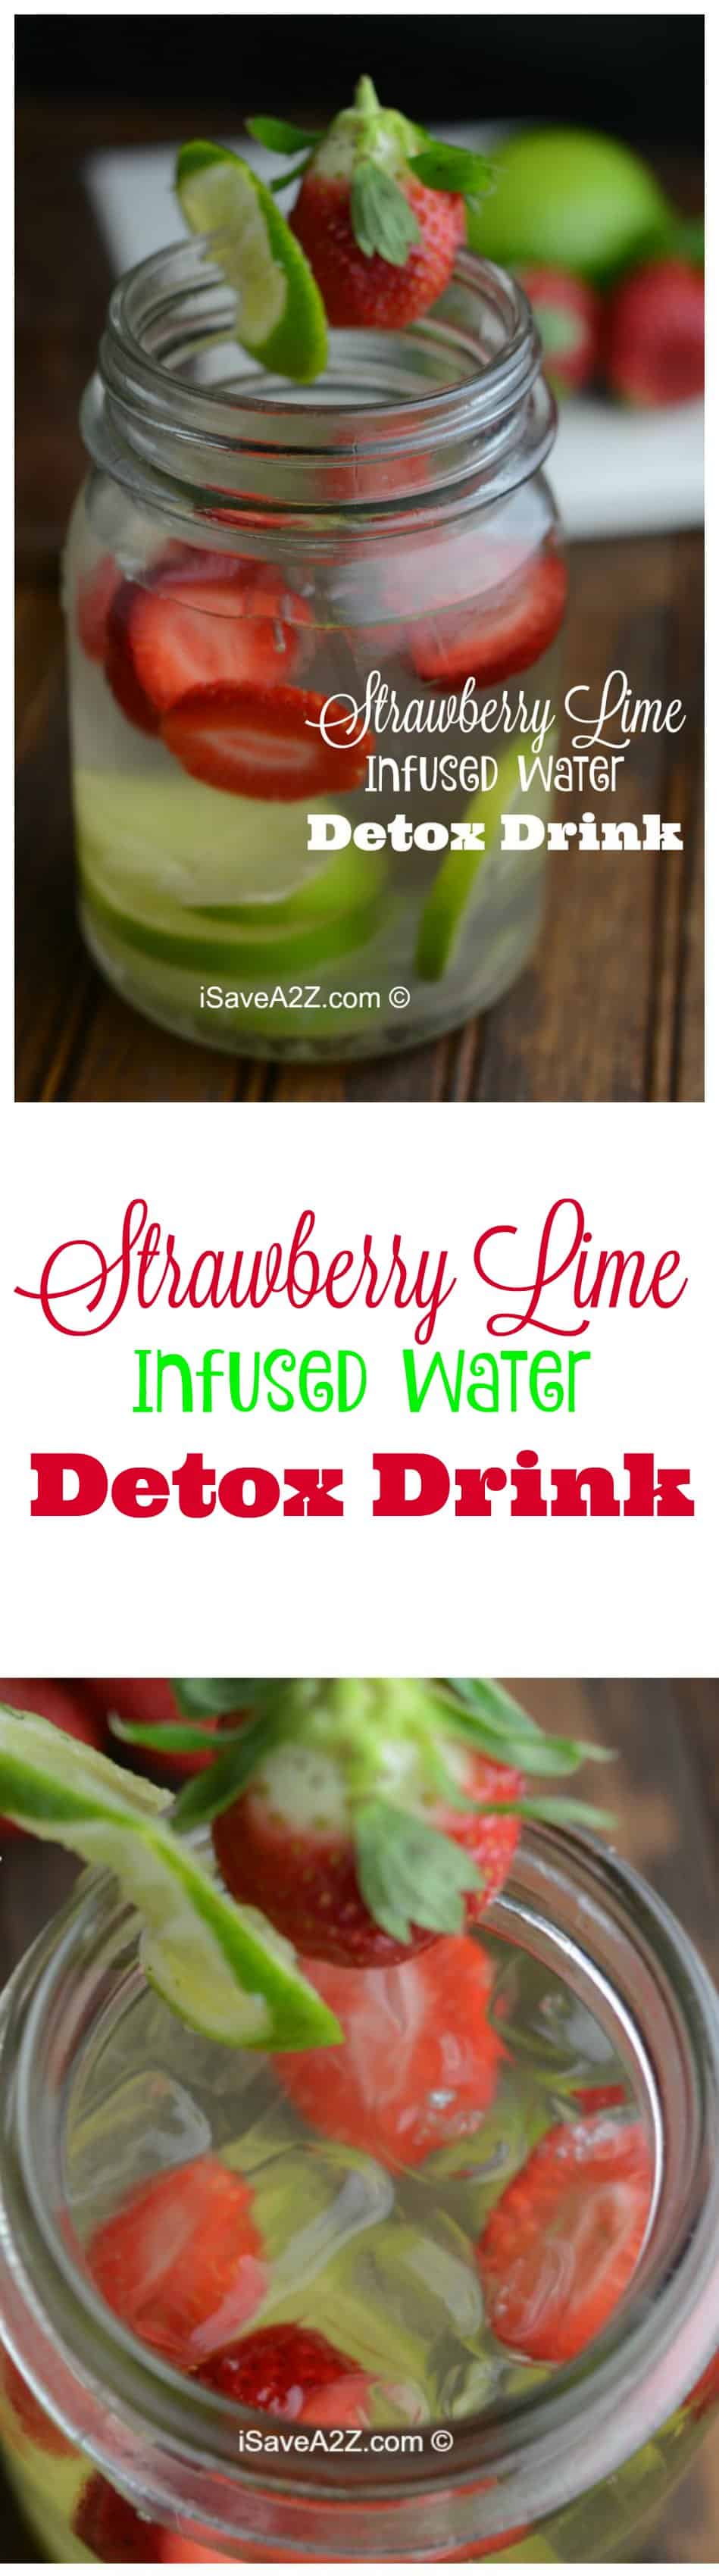 Strawberry Lime Infused Water Detox Drink